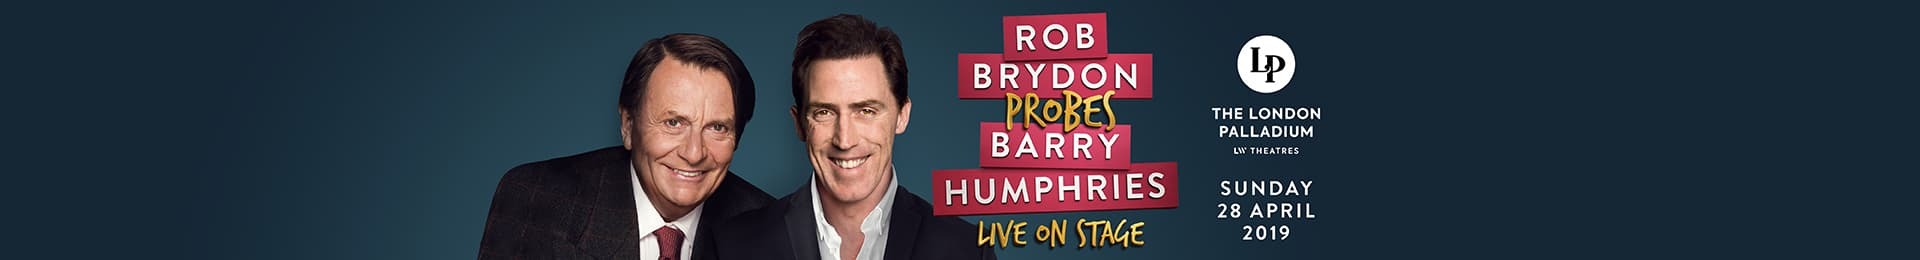 Rob Brydon Probes Barry Humphries banner image